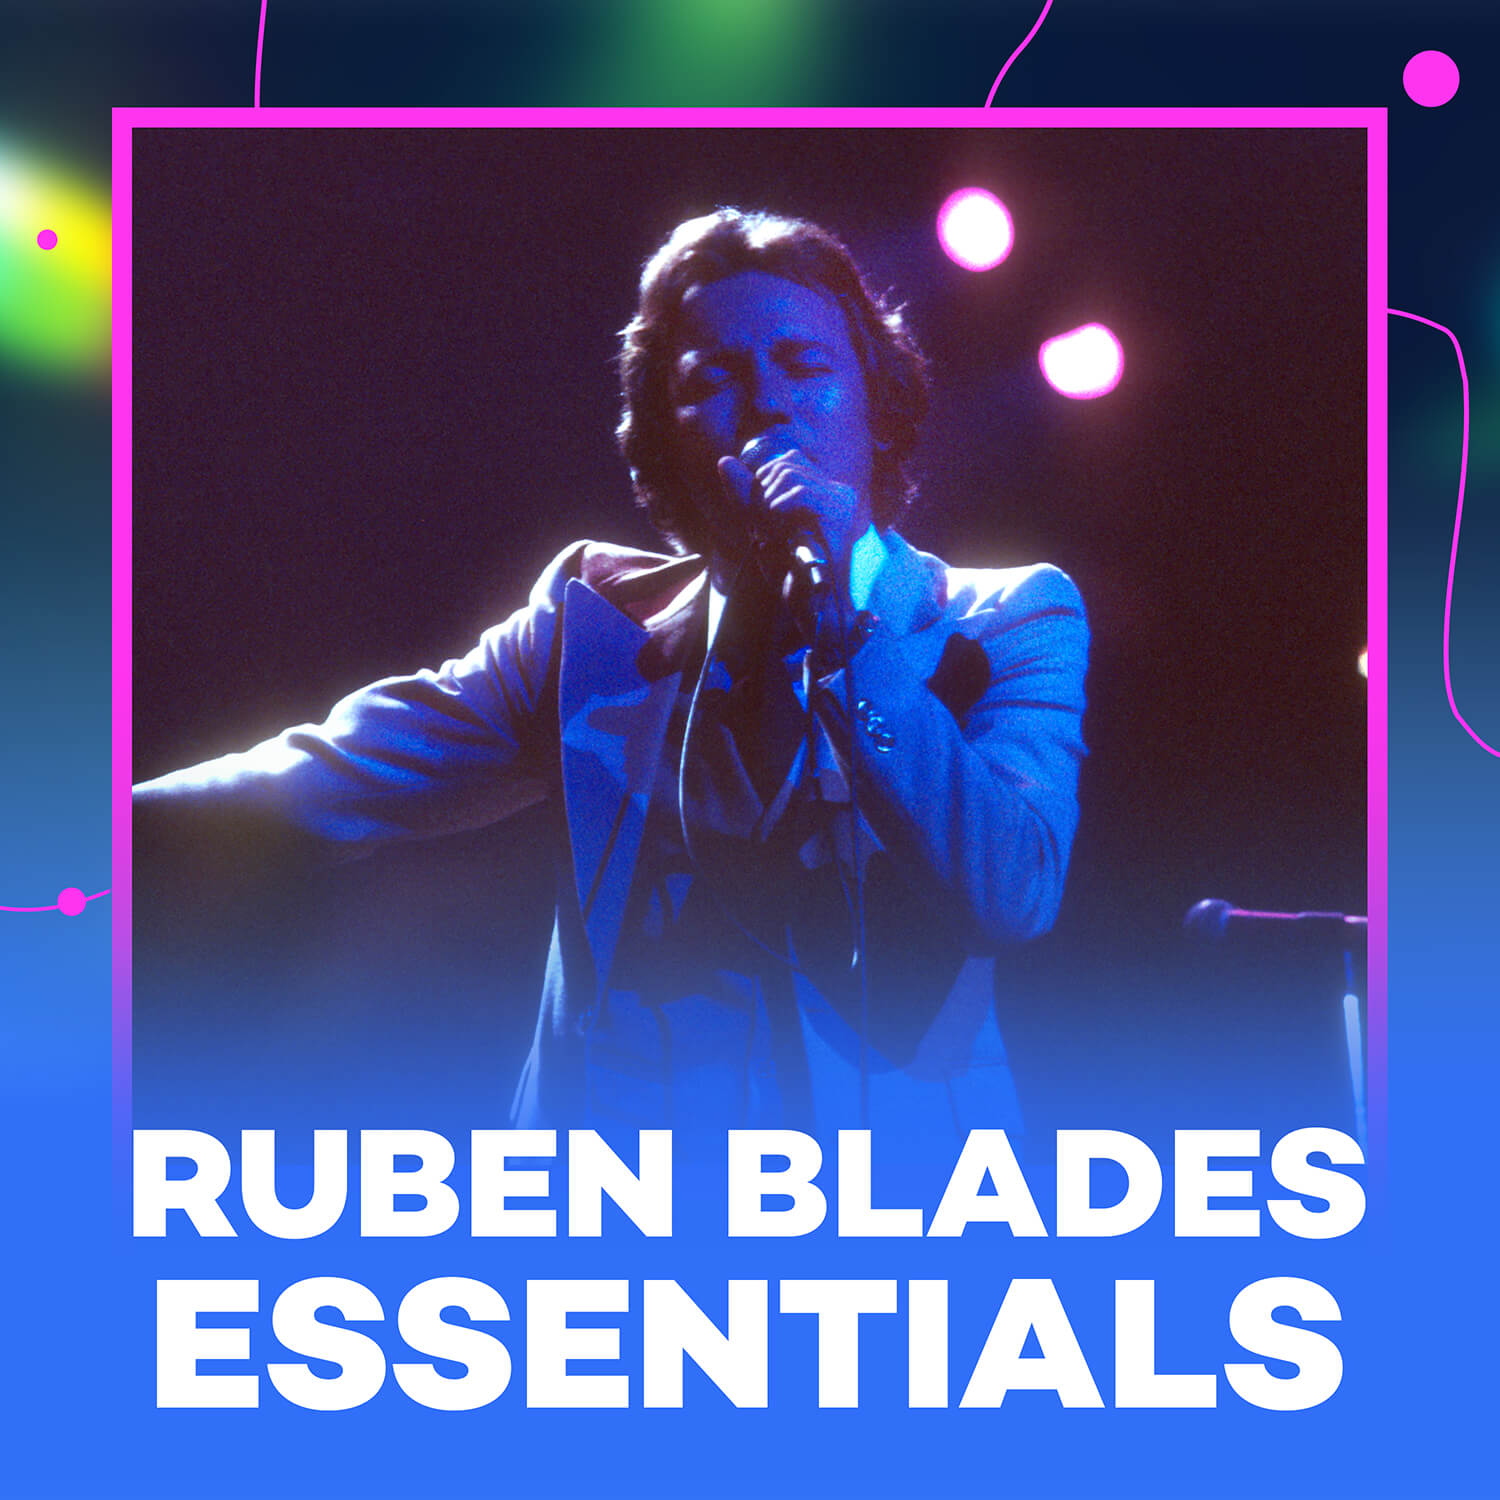 Featured image for “Ruben Blades”